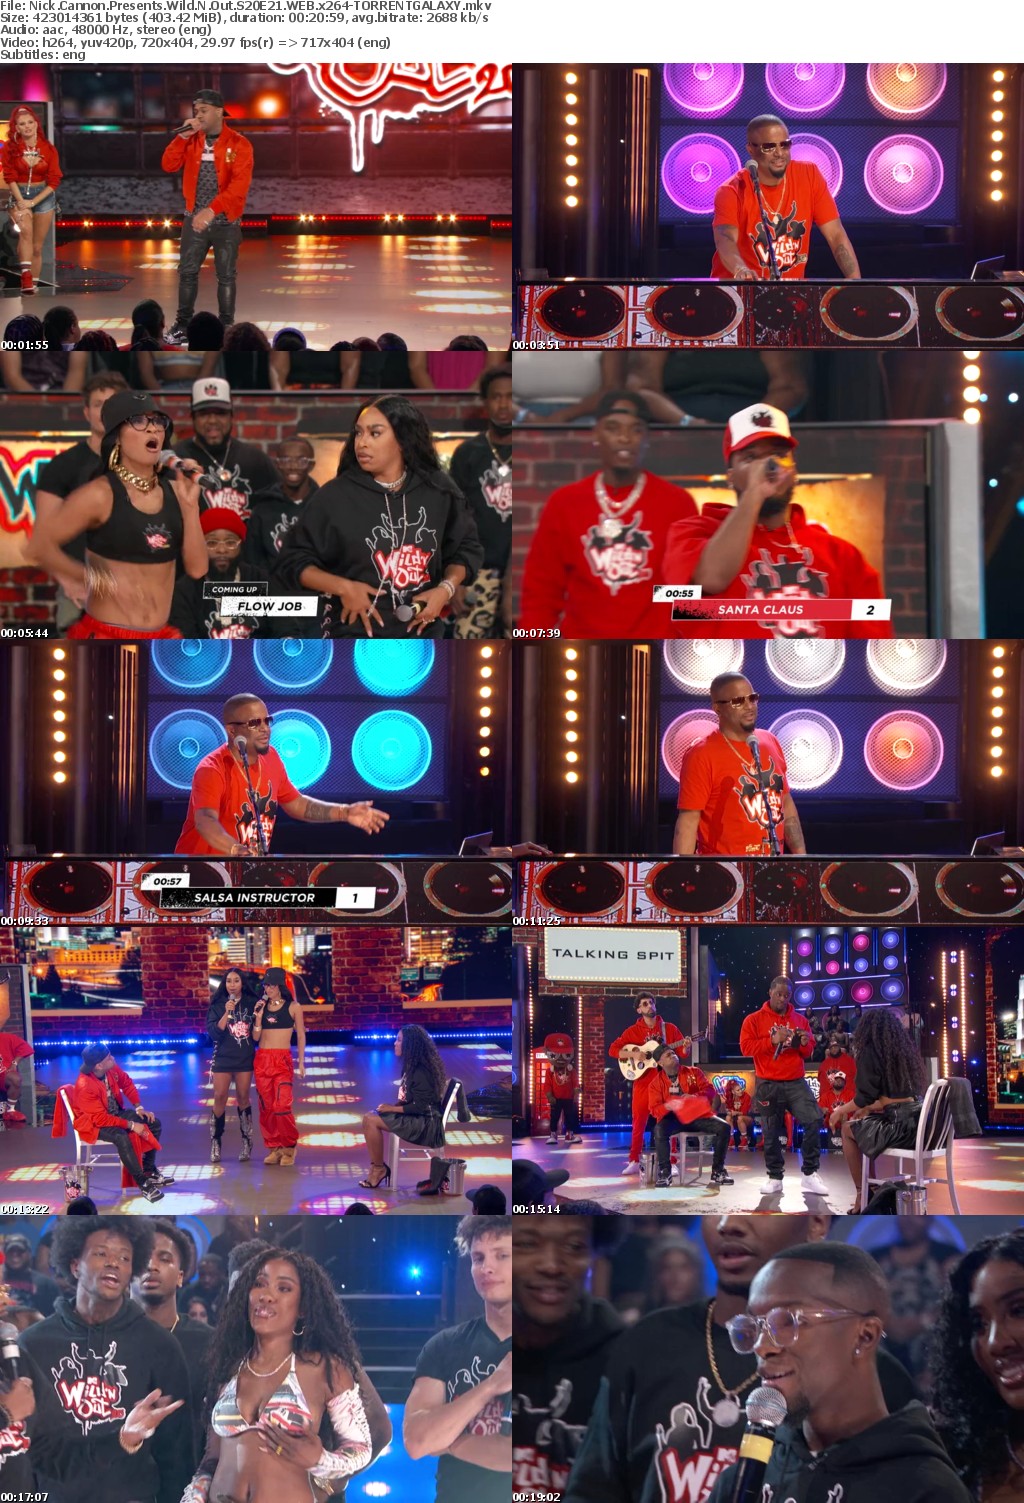 Nick Cannon Presents Wild N Out S20E21 WEB x264-GALAXY